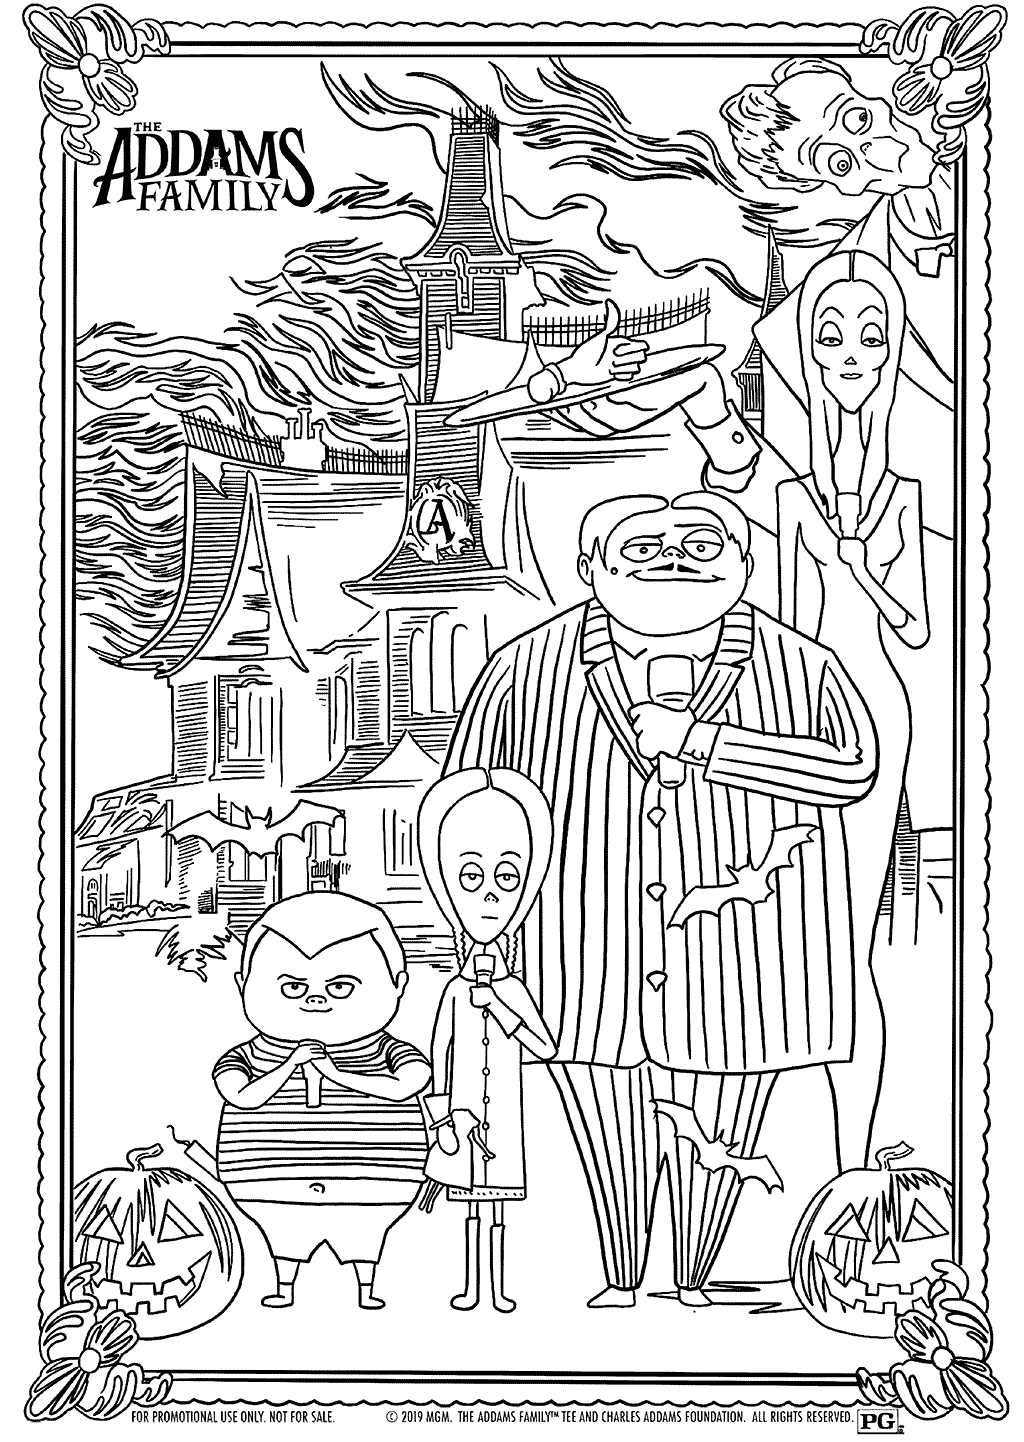 The Addams Family Coloring Pages: A Timeless Icon of Gothic Culture - Addams Family House Coloring Pages